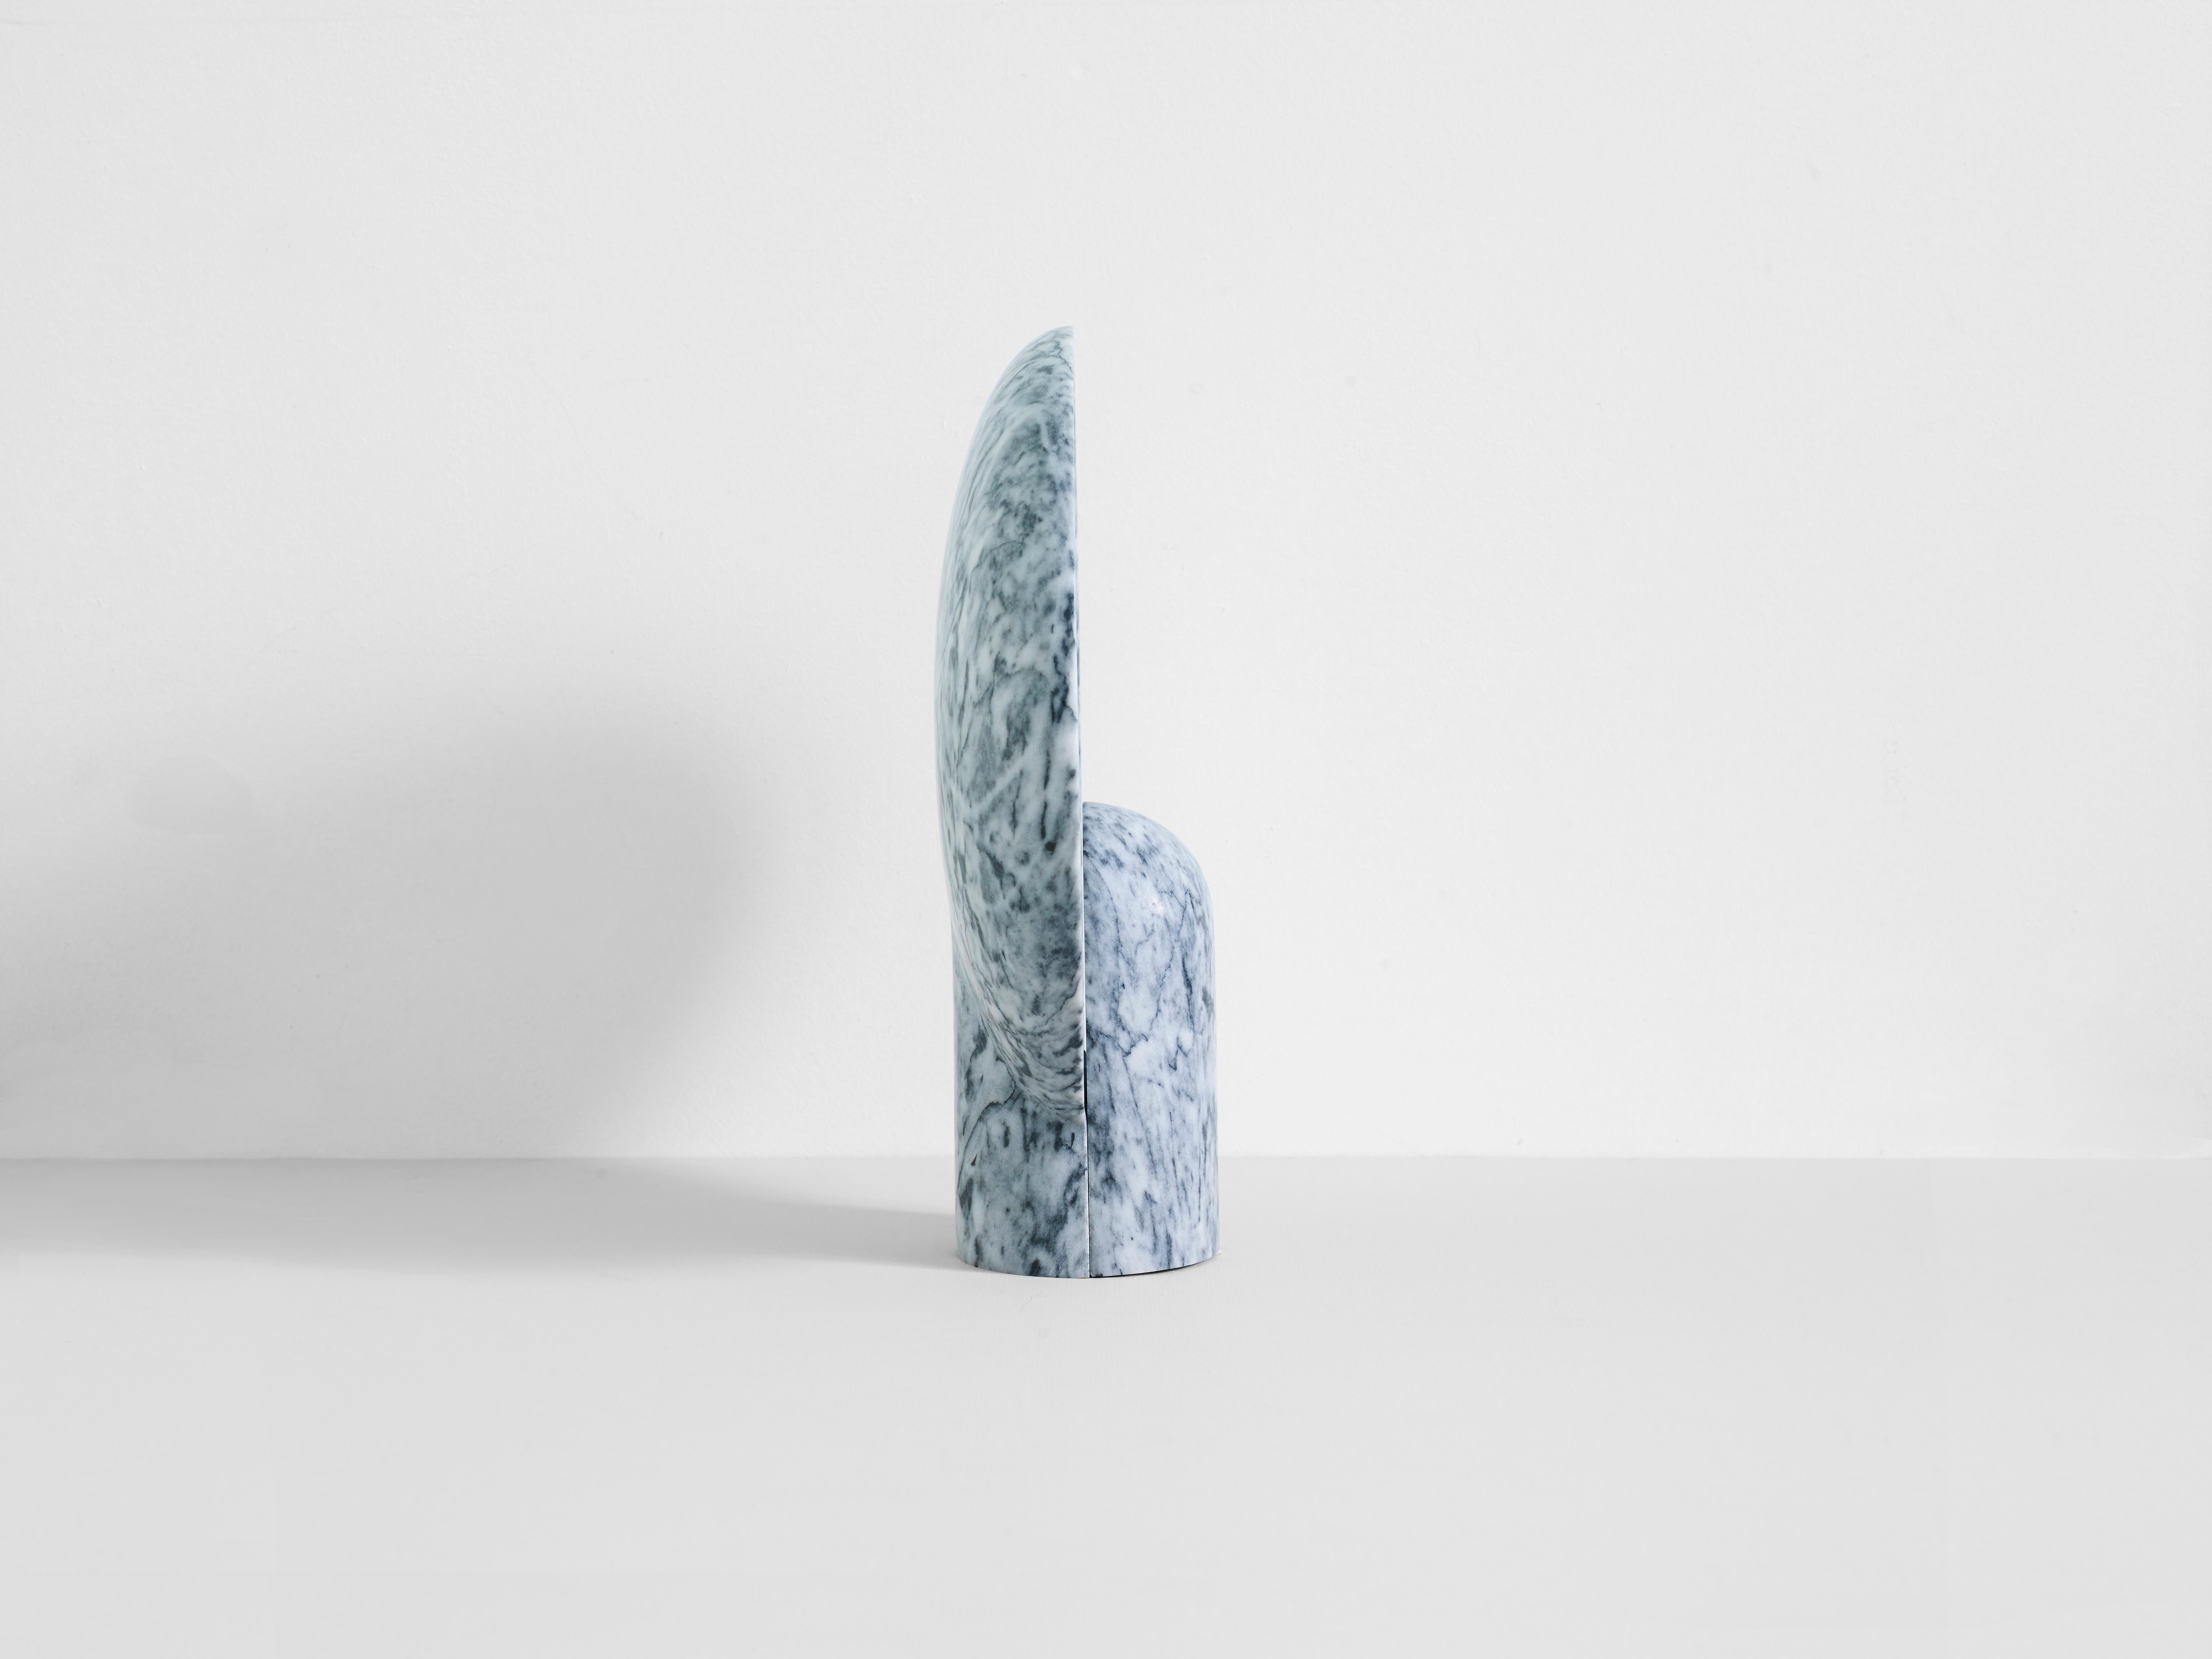 This sculptural item is handmade in Sydney Australia.

The surface sconce in clear Gris Duoro marble is an ambient, sculptural light carved in two halves from solid stone.

Each light is manufactured in natural stone, meaning variations of the